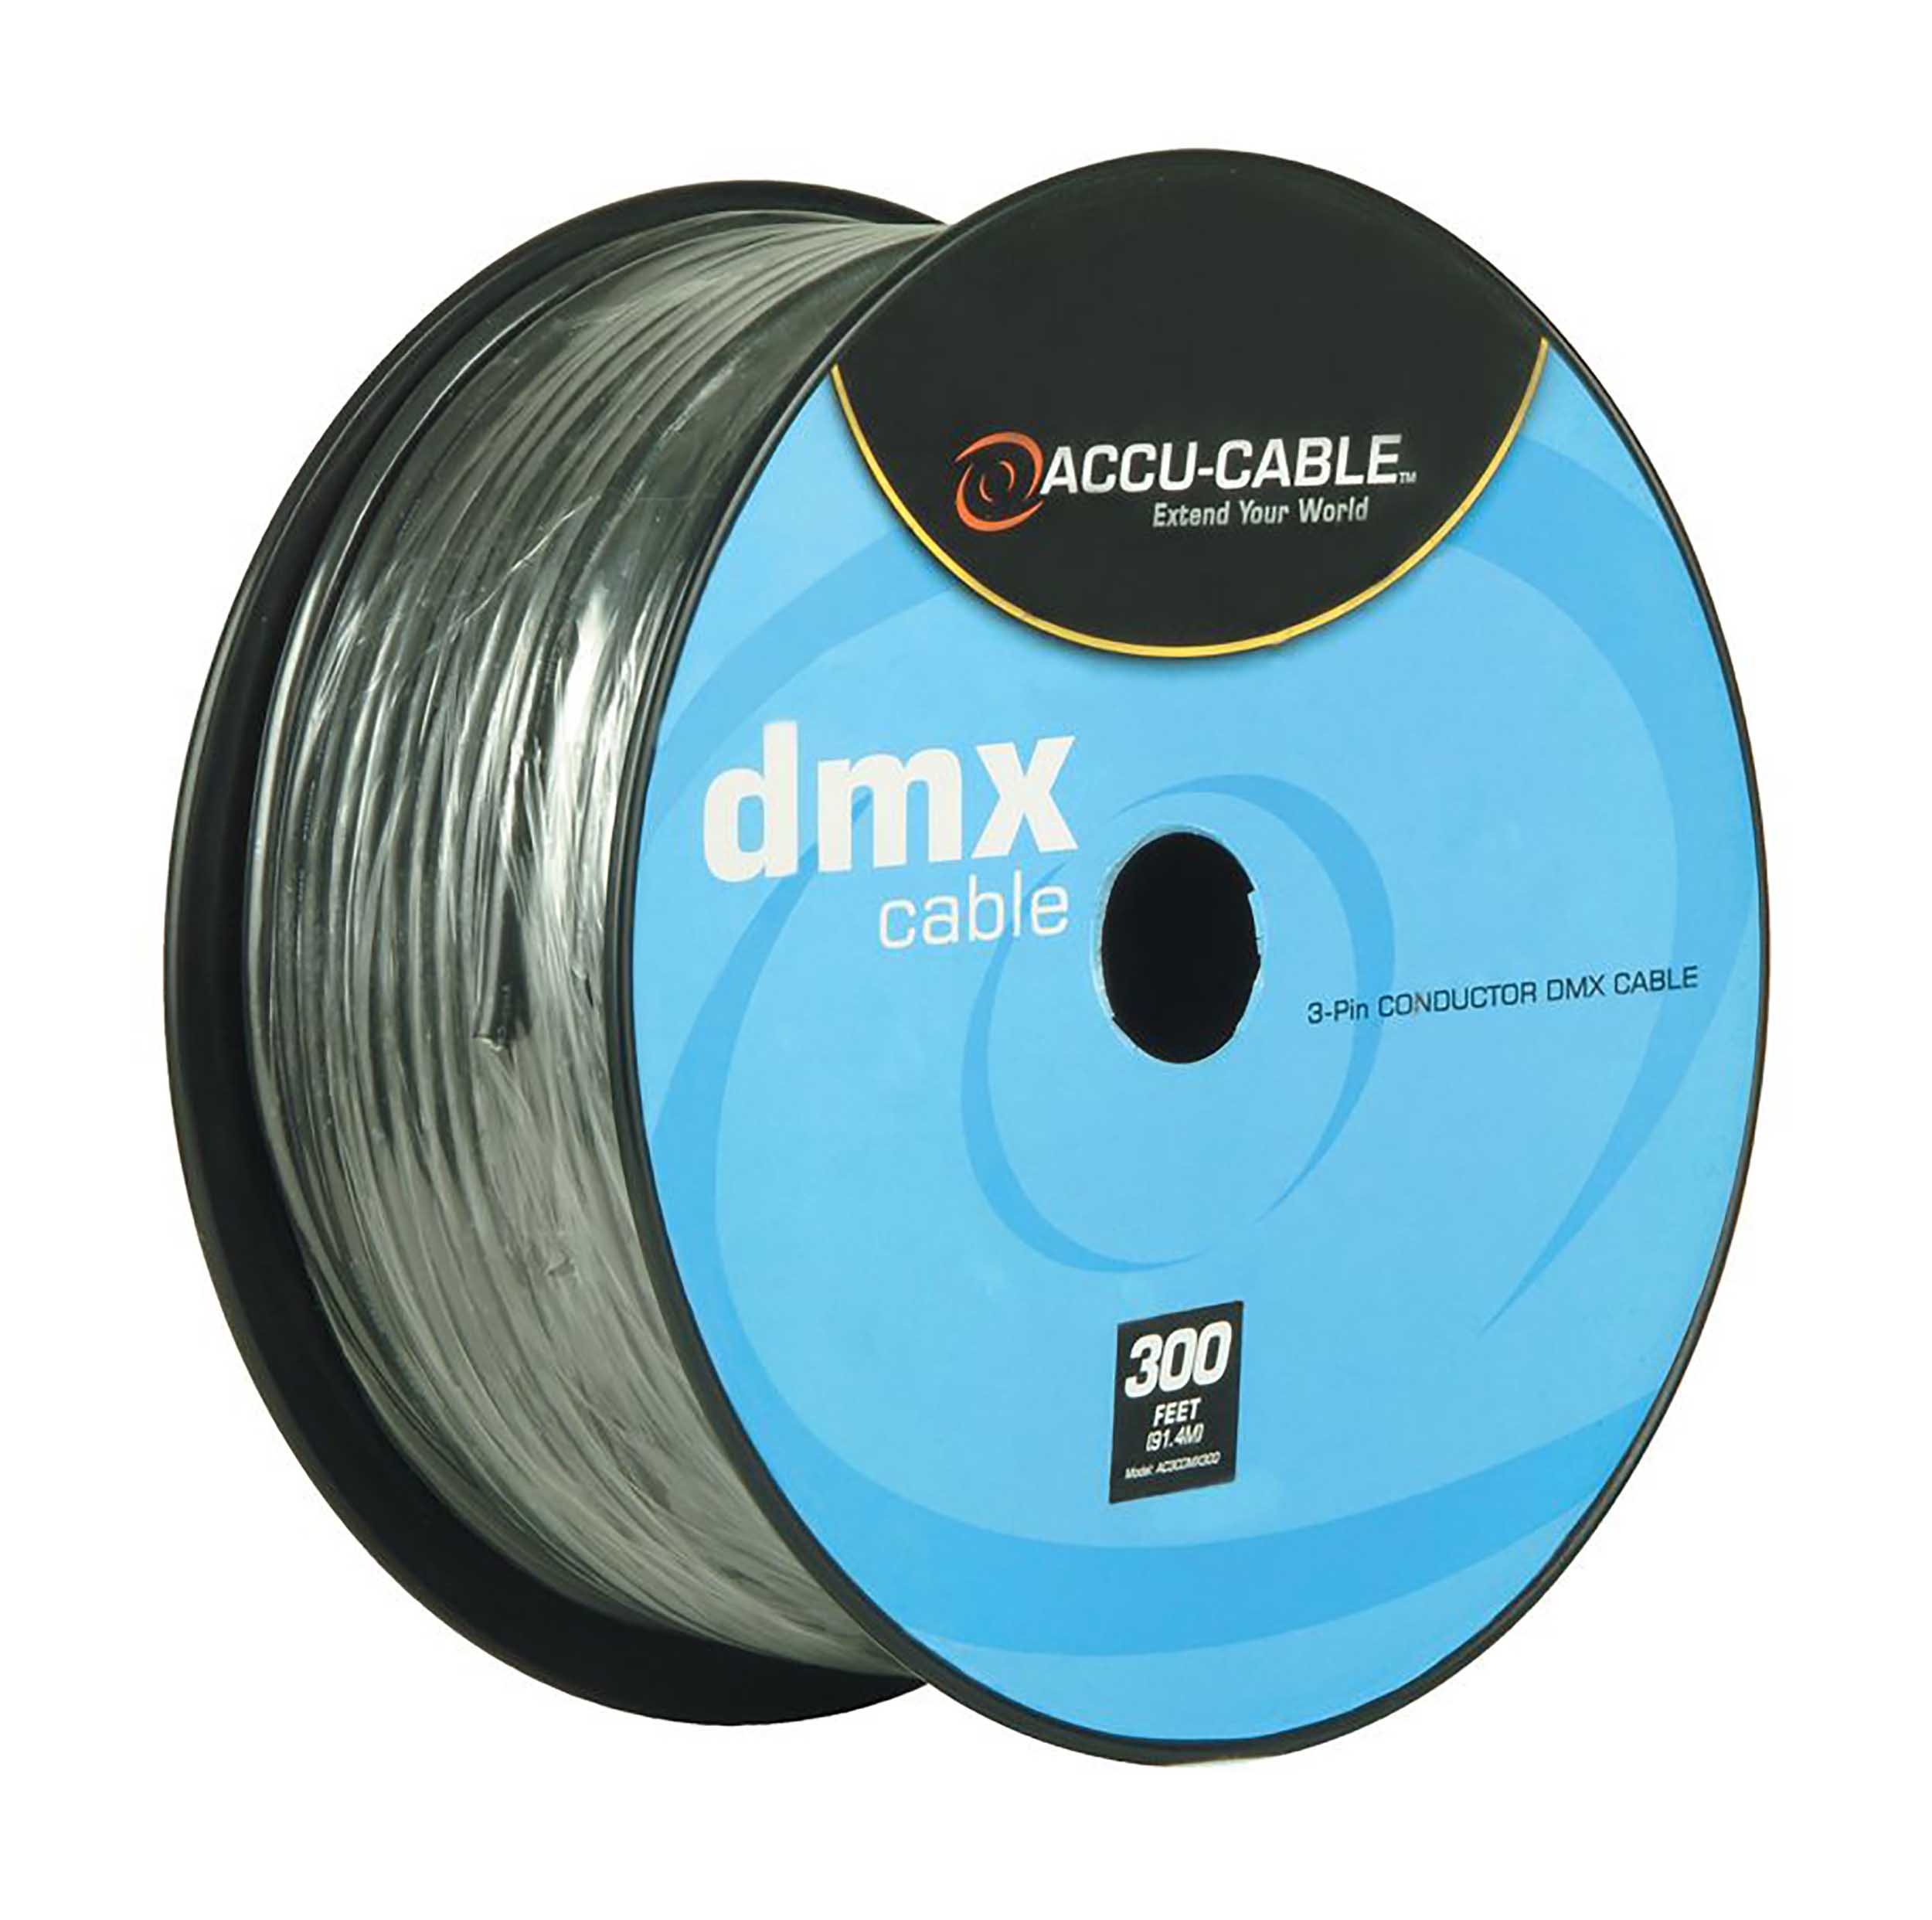 Accu-Cable AC3CDMX300, 3-Pin DMX Cable Spool - 300 Ft by Accu Cable